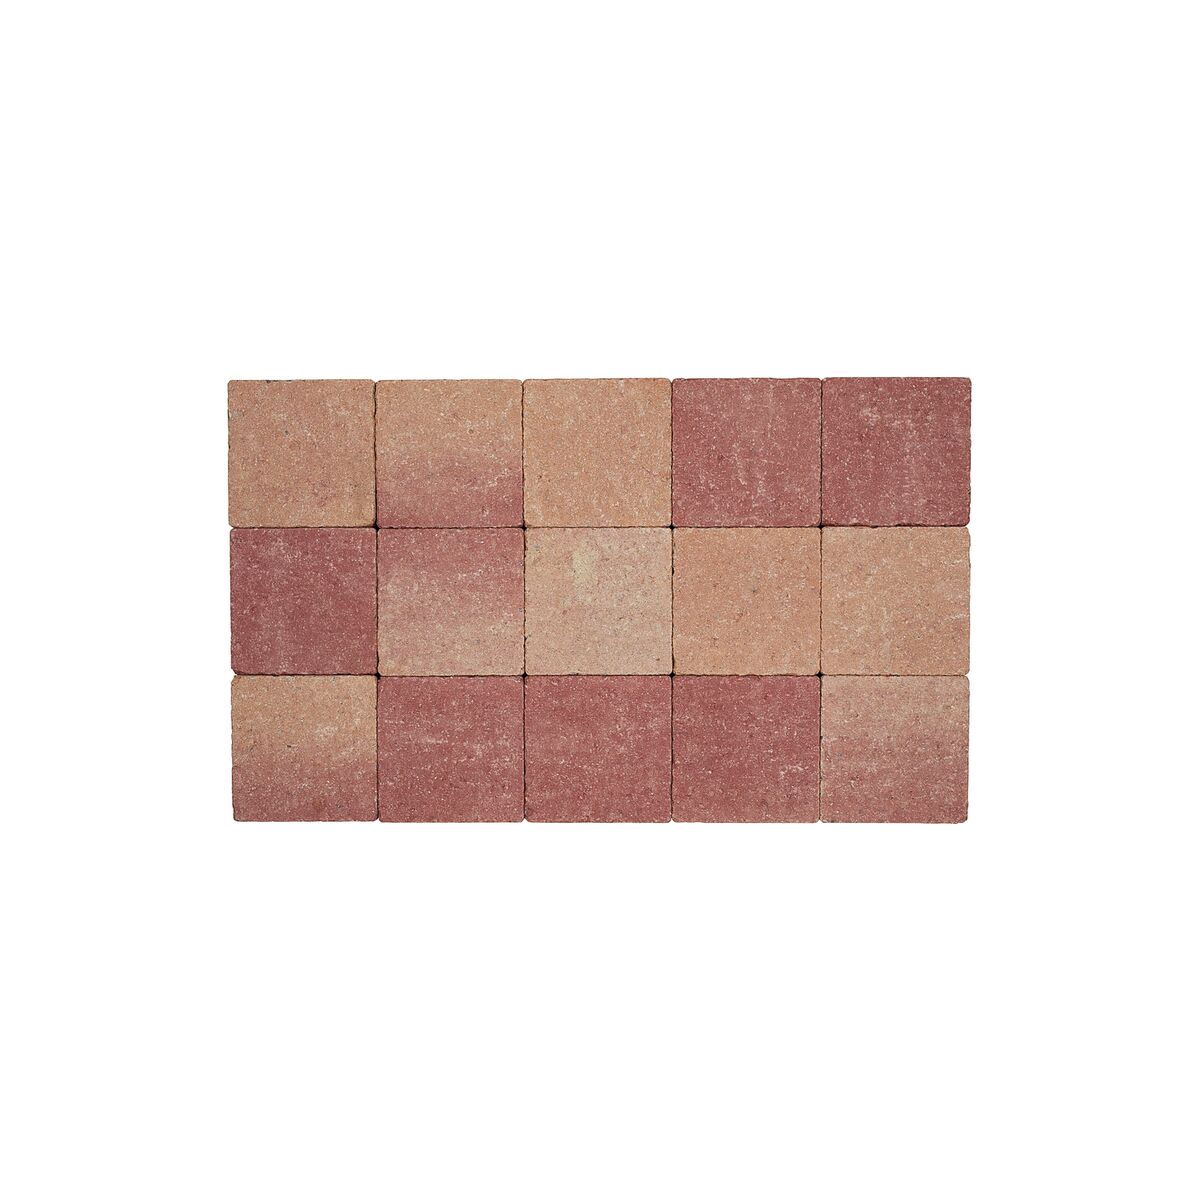 In-line getrommeld 15 x 15 x 6 - Rose-rood